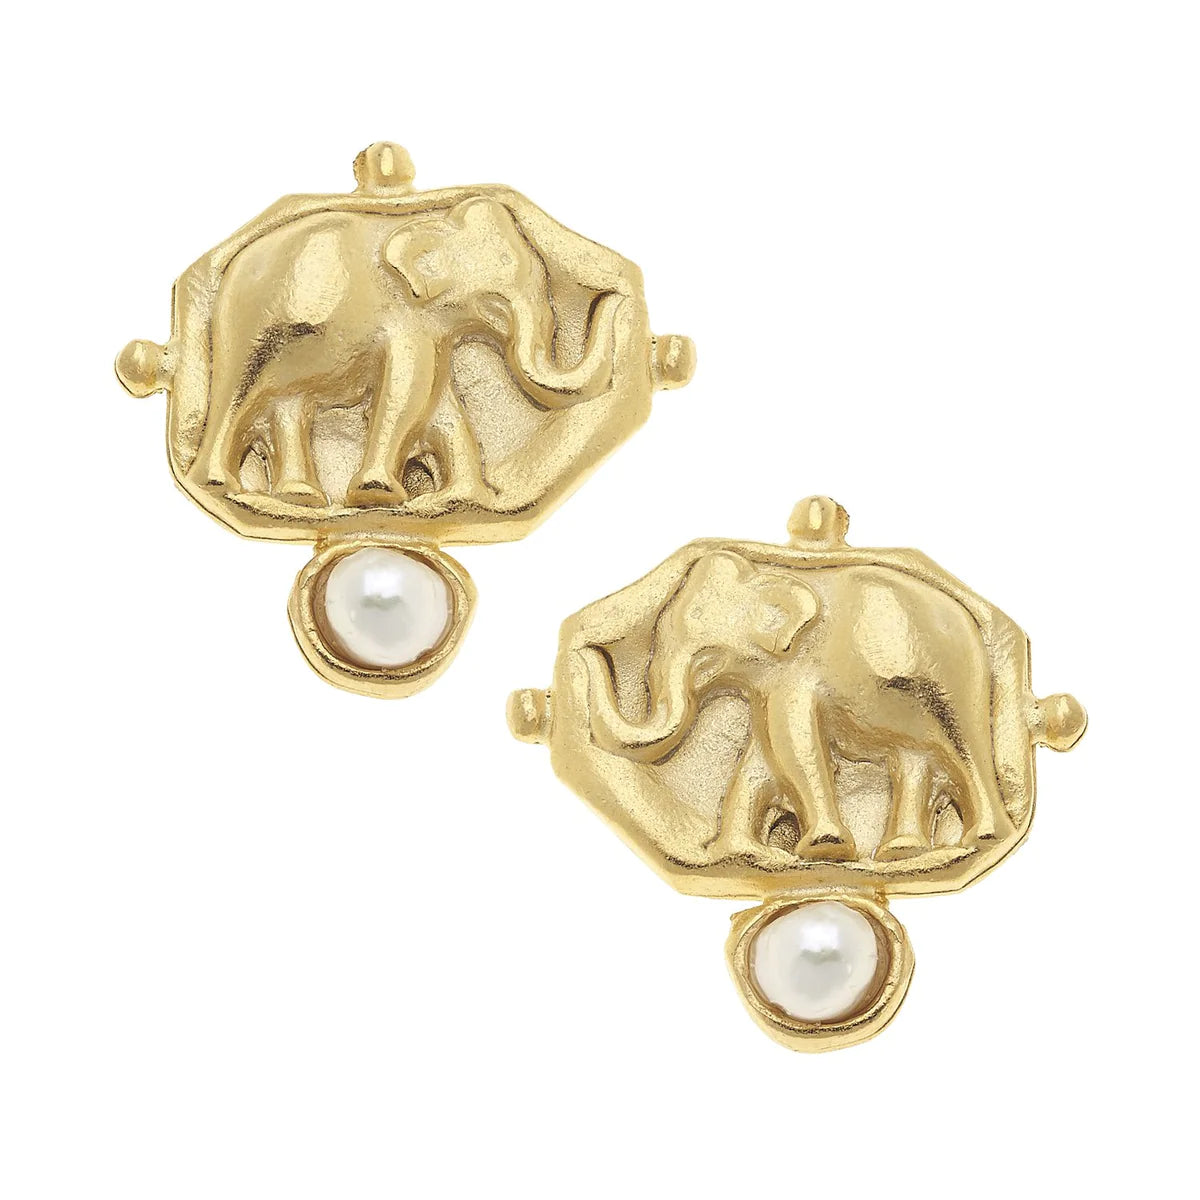 Susan Shaw Earring with Elephant Intaglio and Pearl